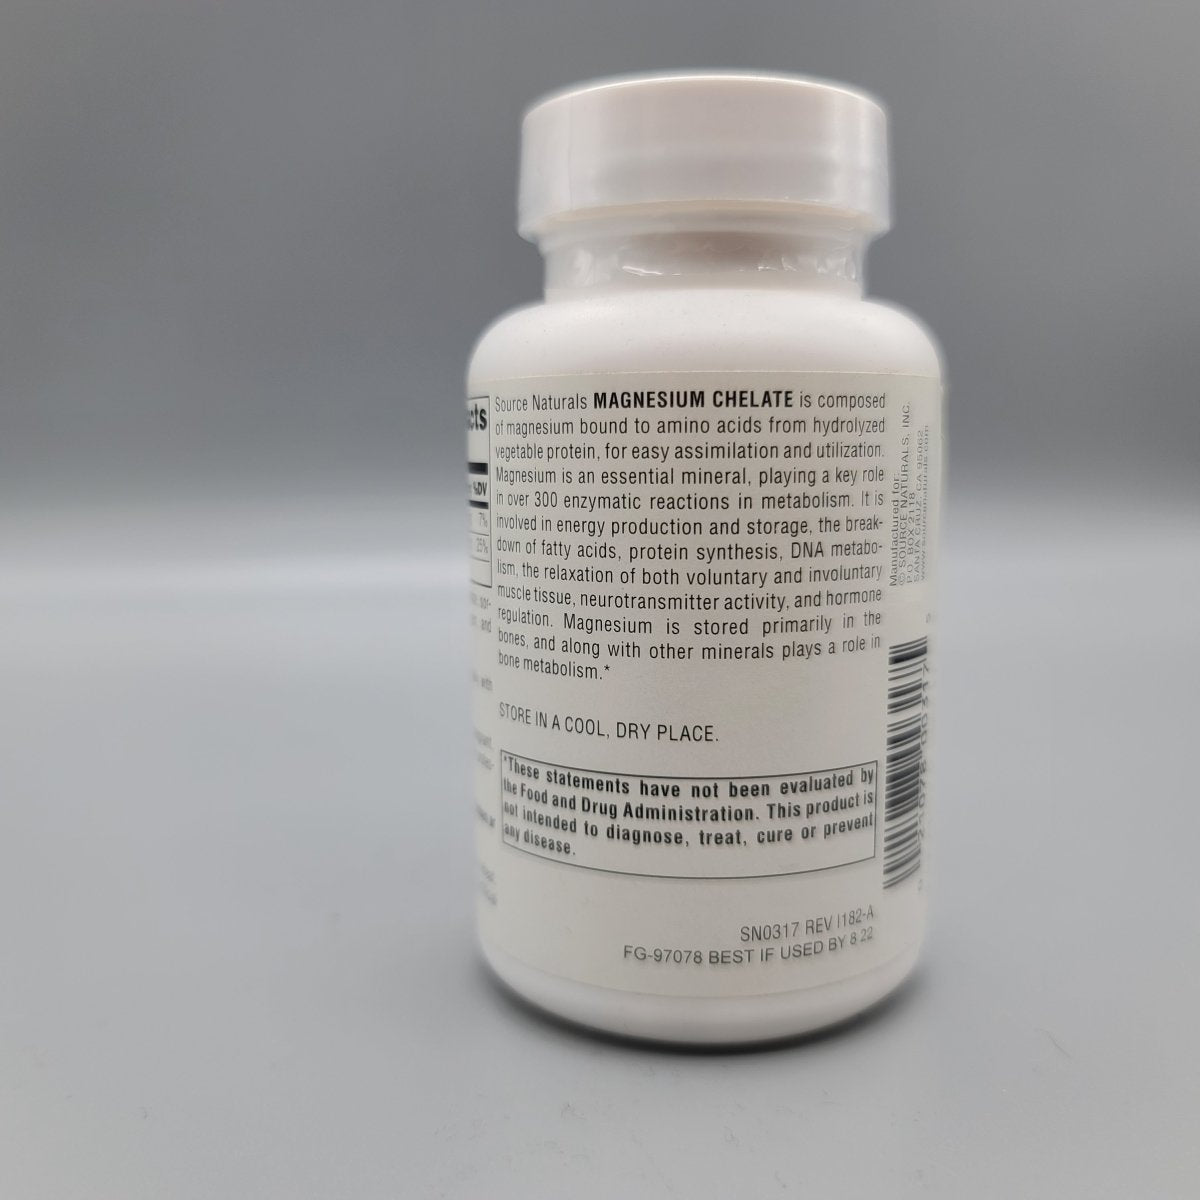 Magnesium Chelate 100mg 100 Tablets